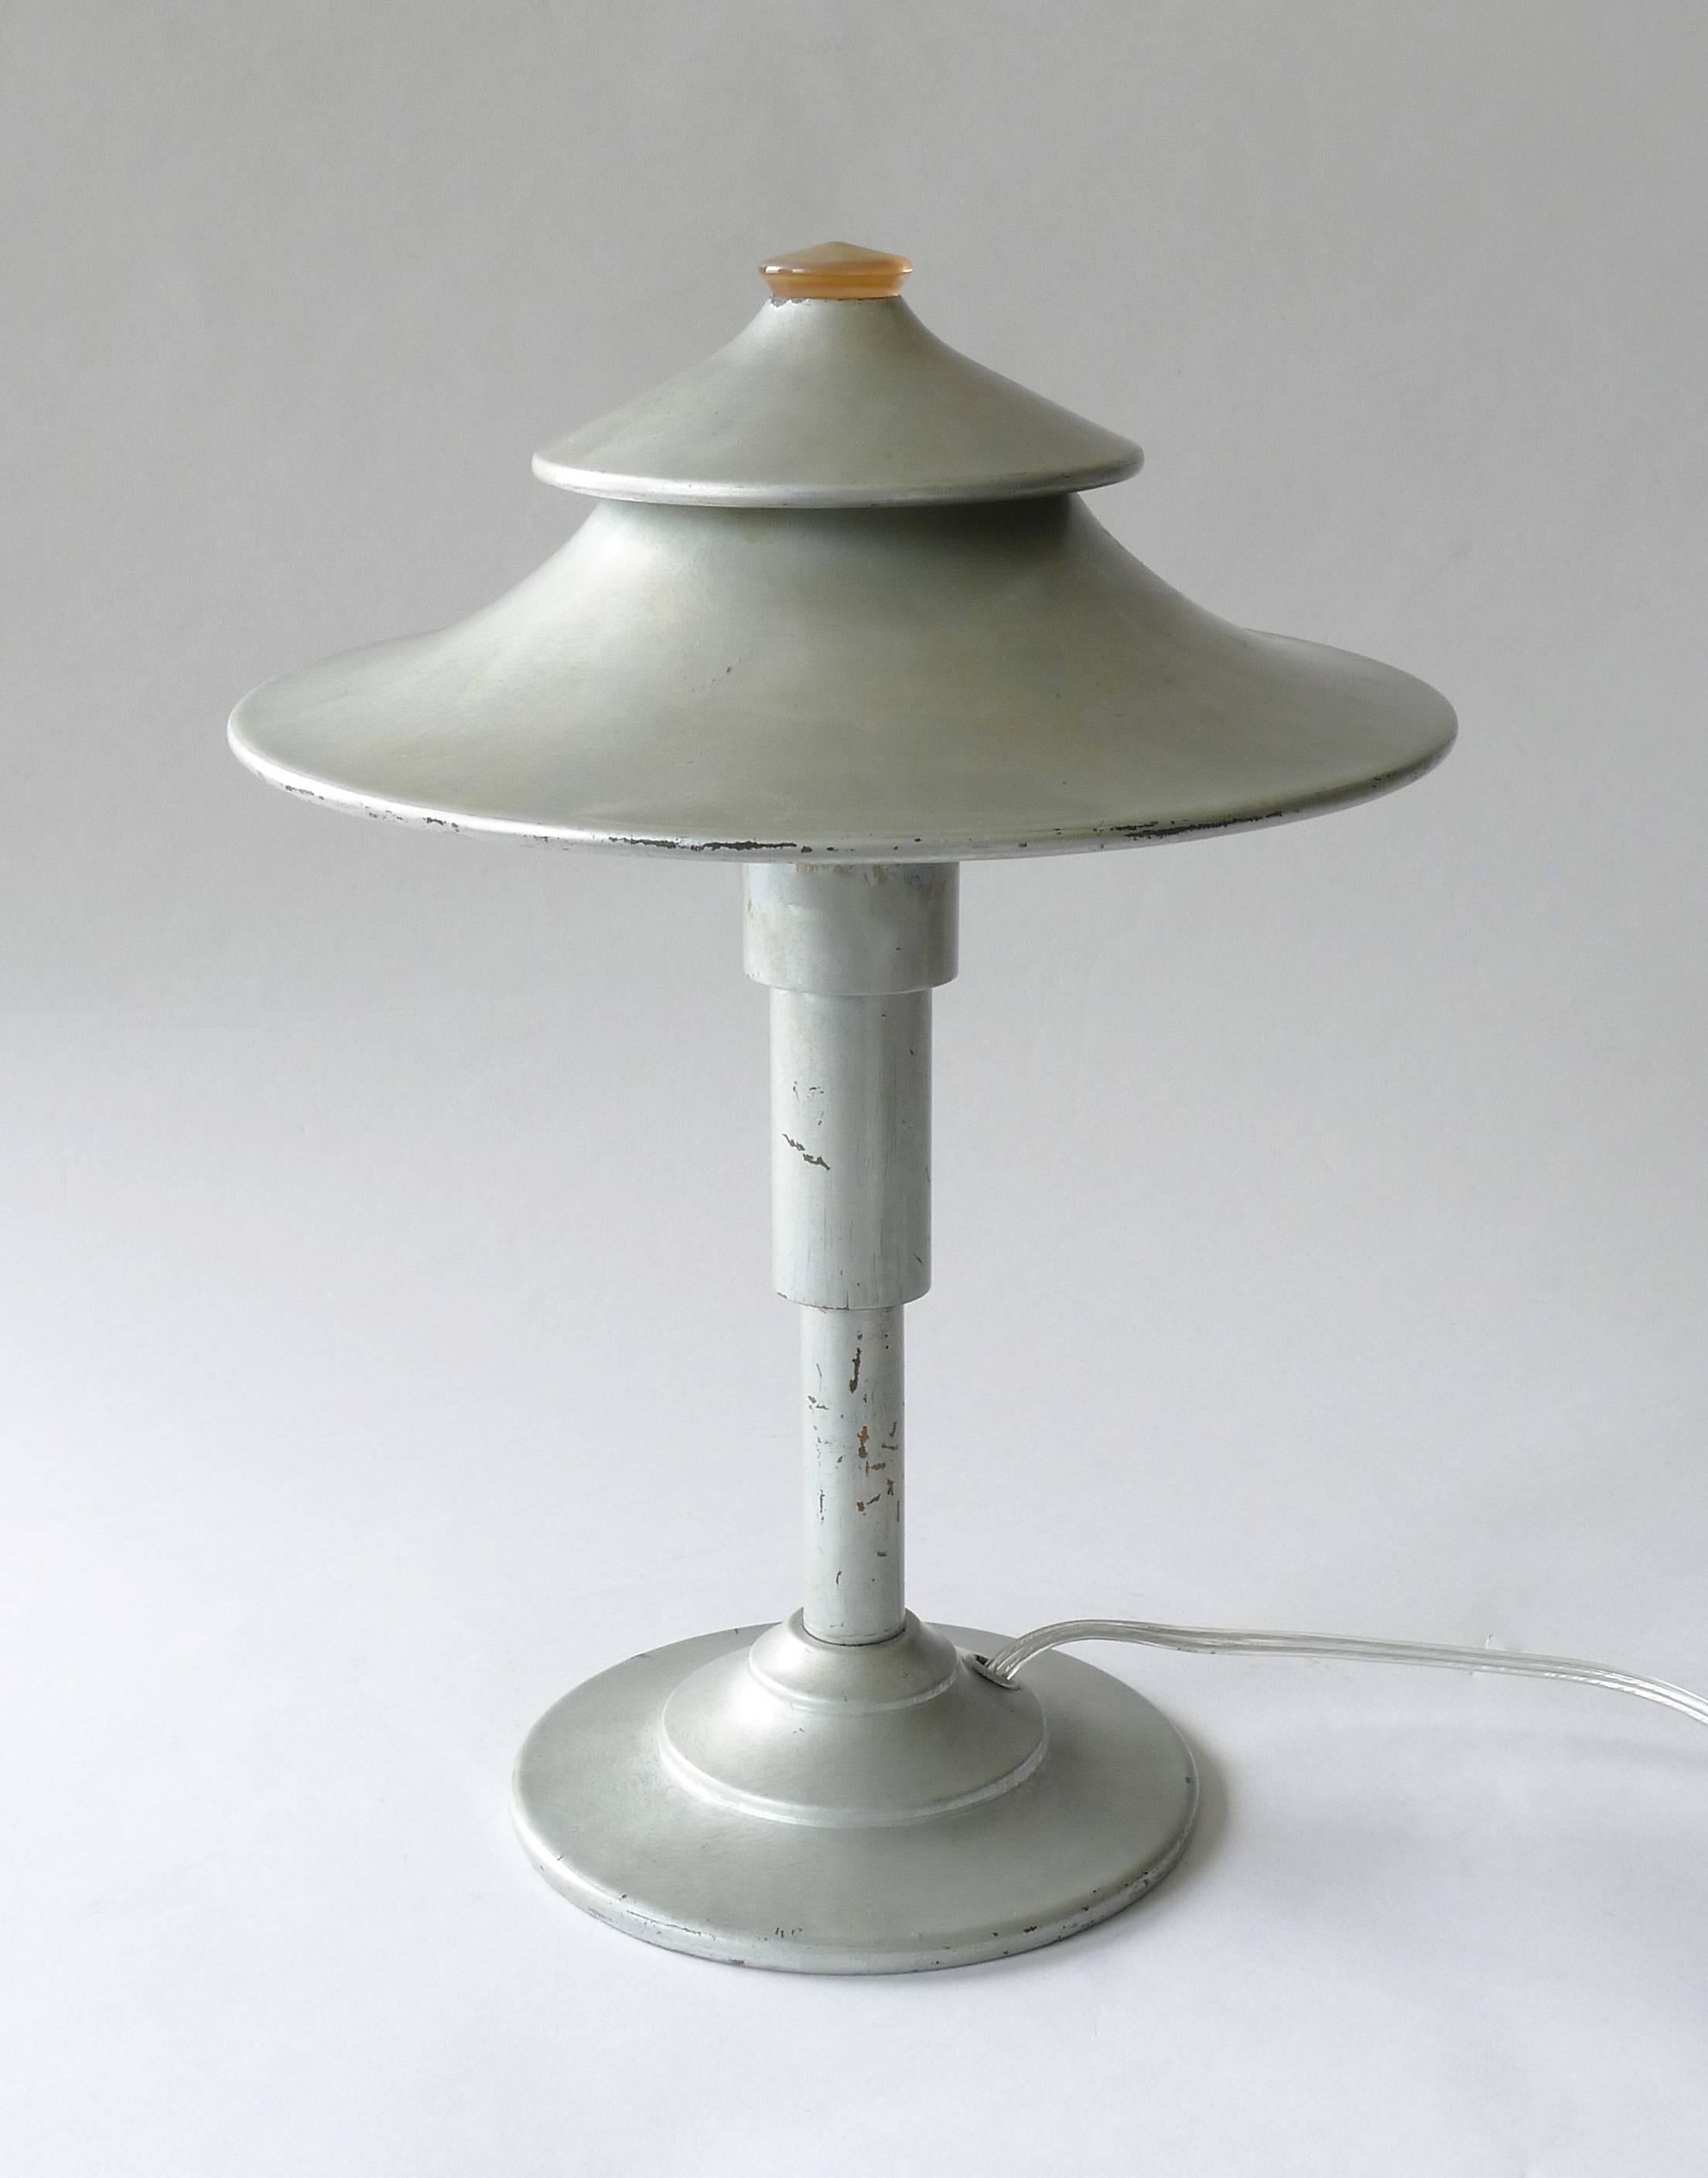 1930's Art Deco Iconic Walter Von Nessen Table Lamp In Good Condition For Sale In Newburgh, NY